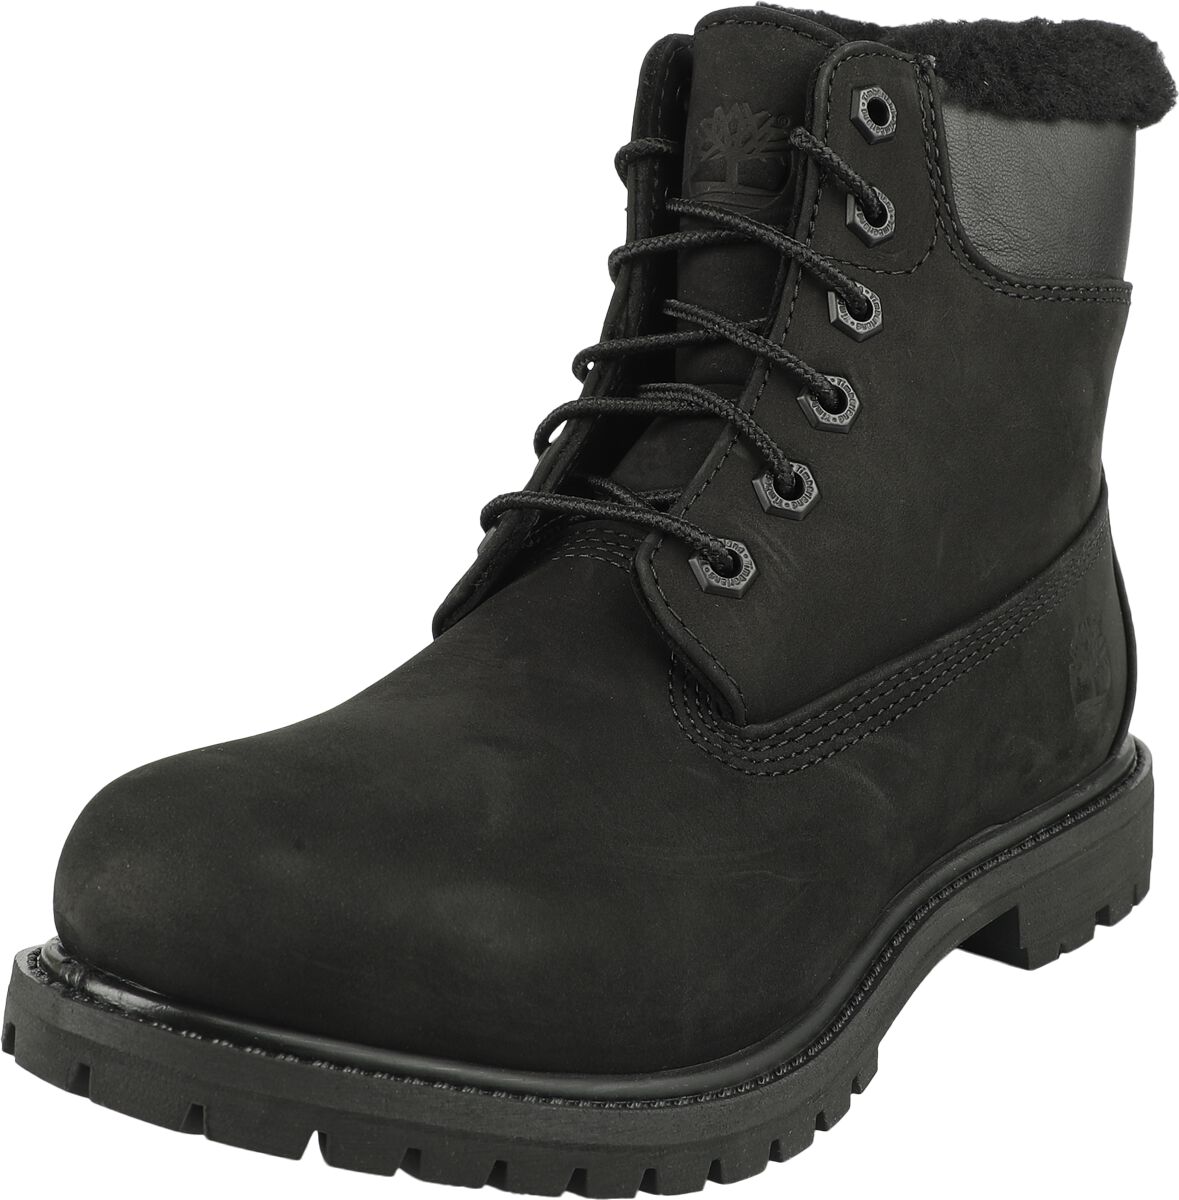 Timberland 6 Inch Premium Shearling Lined WP Boot Boot schwarz in EU40